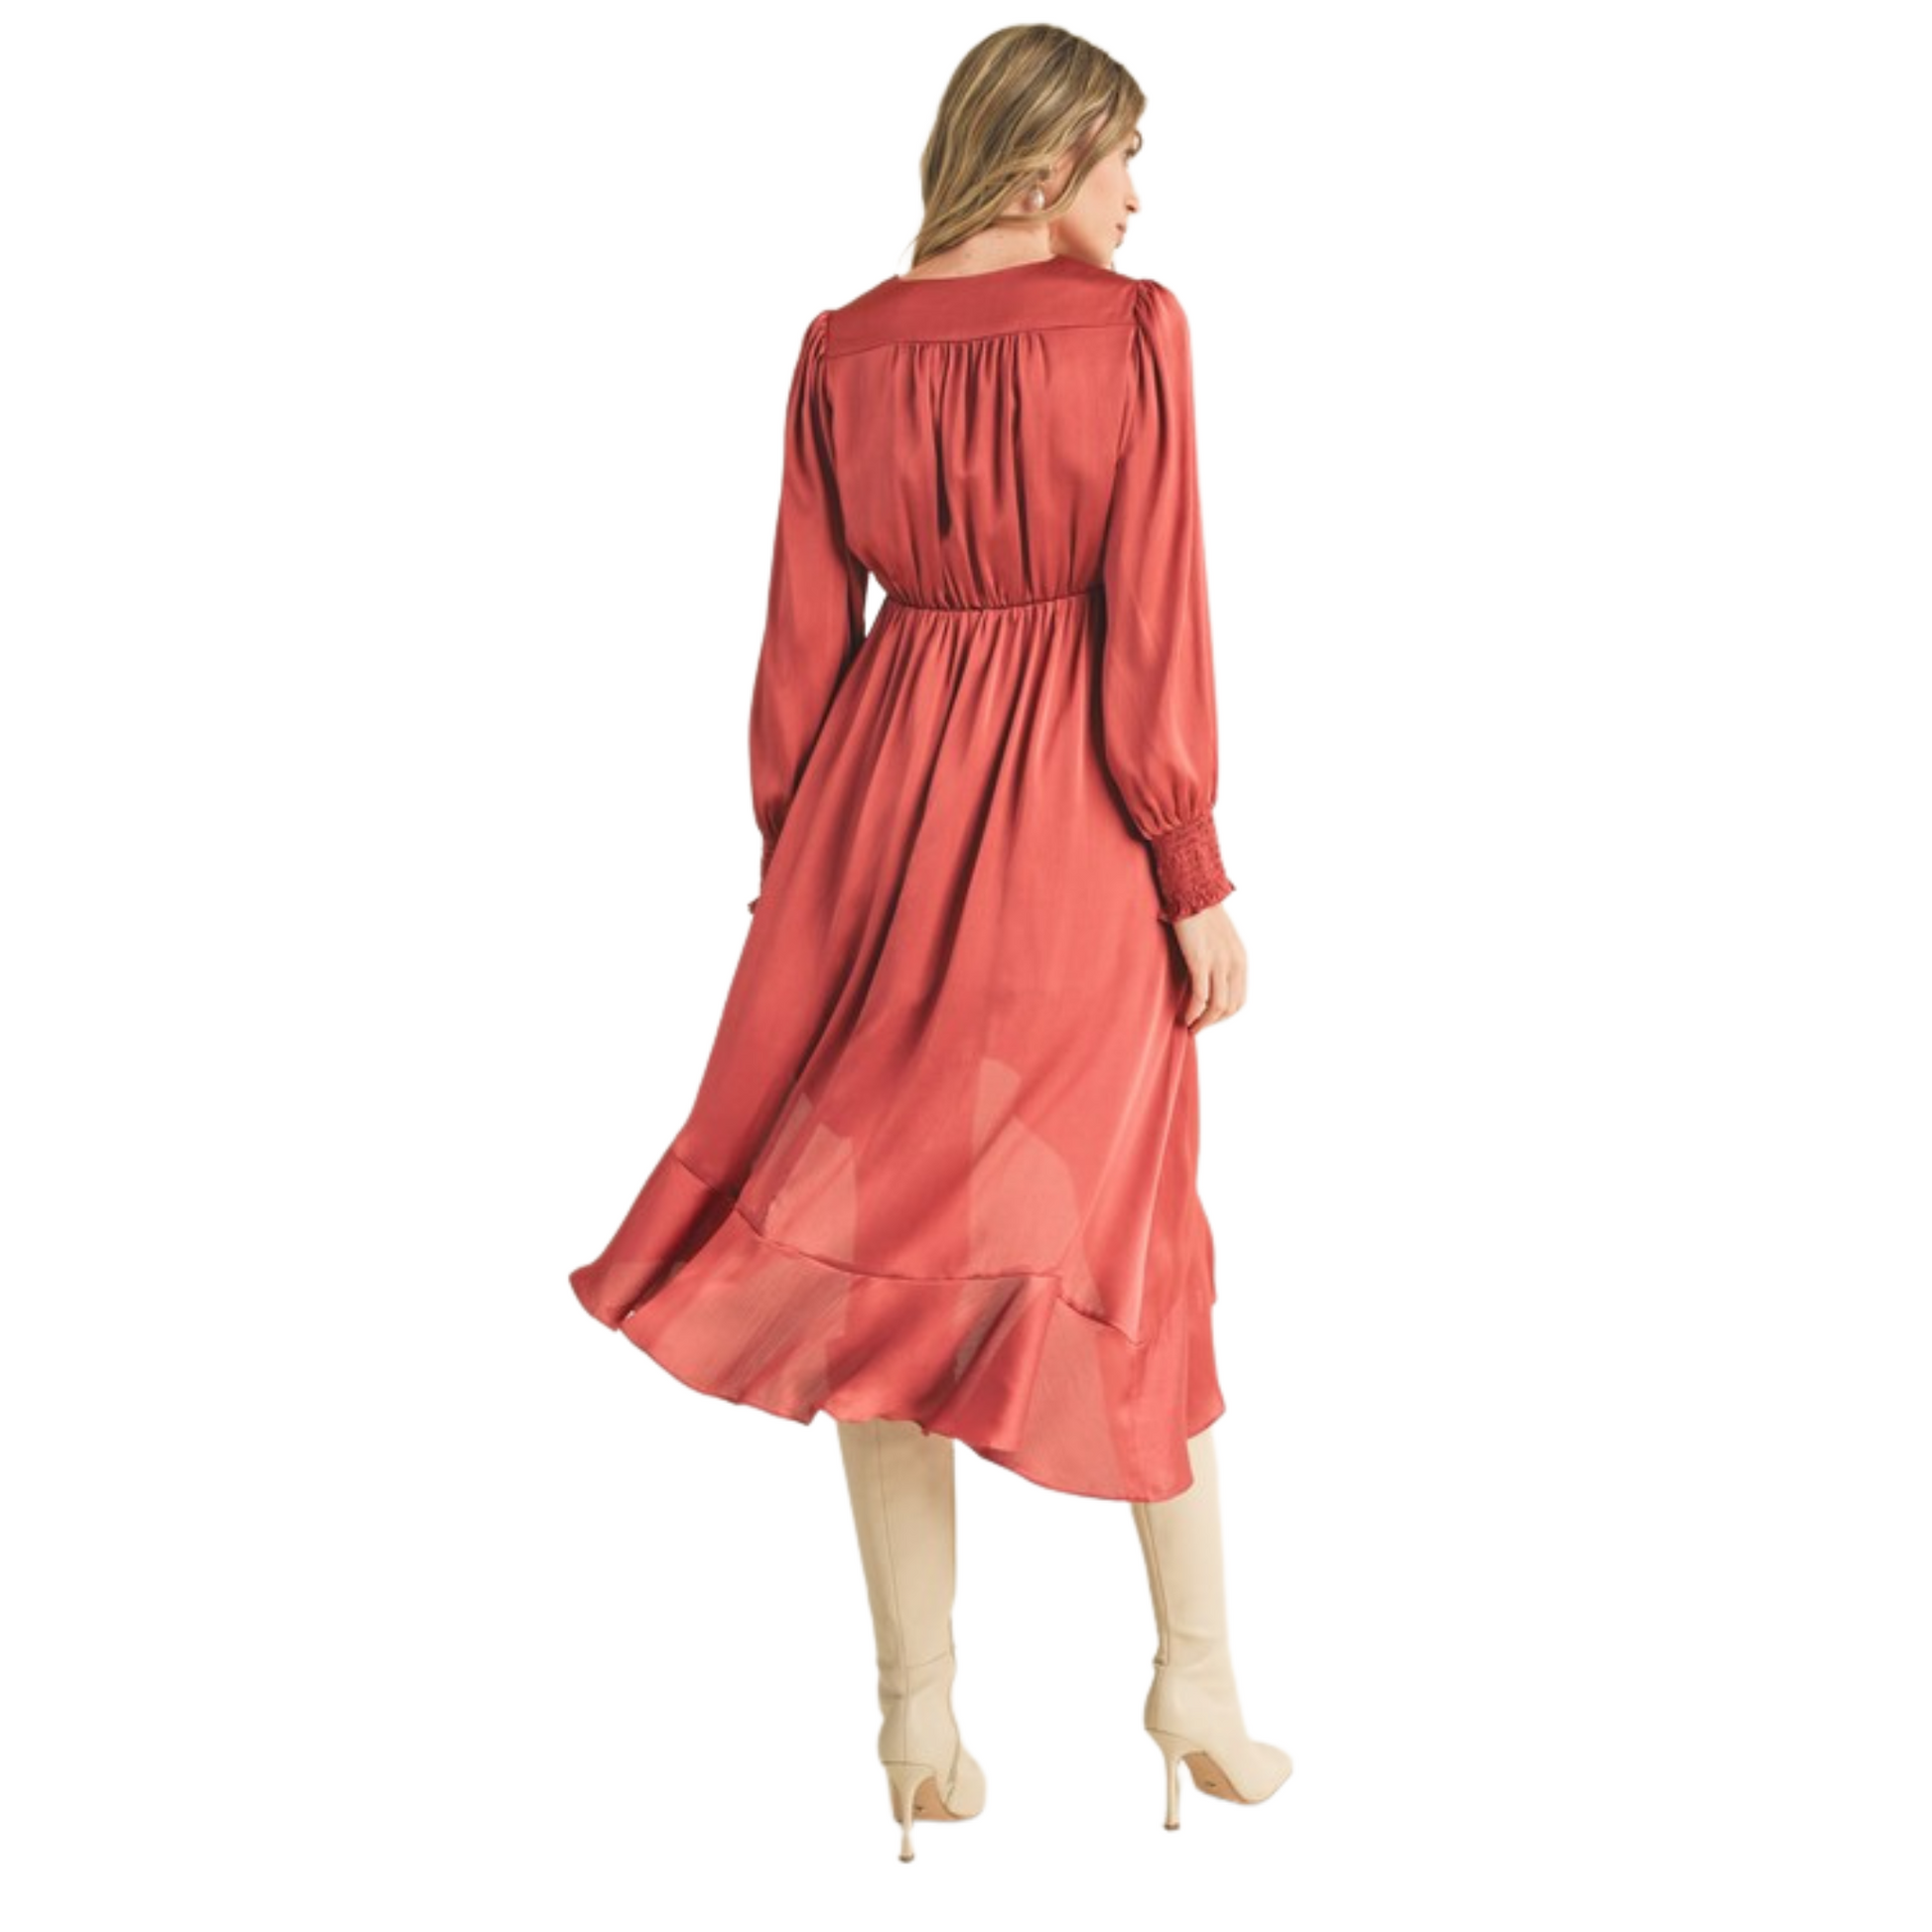 Look stunning in this ruffled hi-low midi dress crafted from a satin effect fabric with a flattering surplice neckline, long puff sleeves with smocked cuffs, and ruffle trim for a feminine finish. The high-low hem adds a timeless touch in the sophisticated rose vale color.